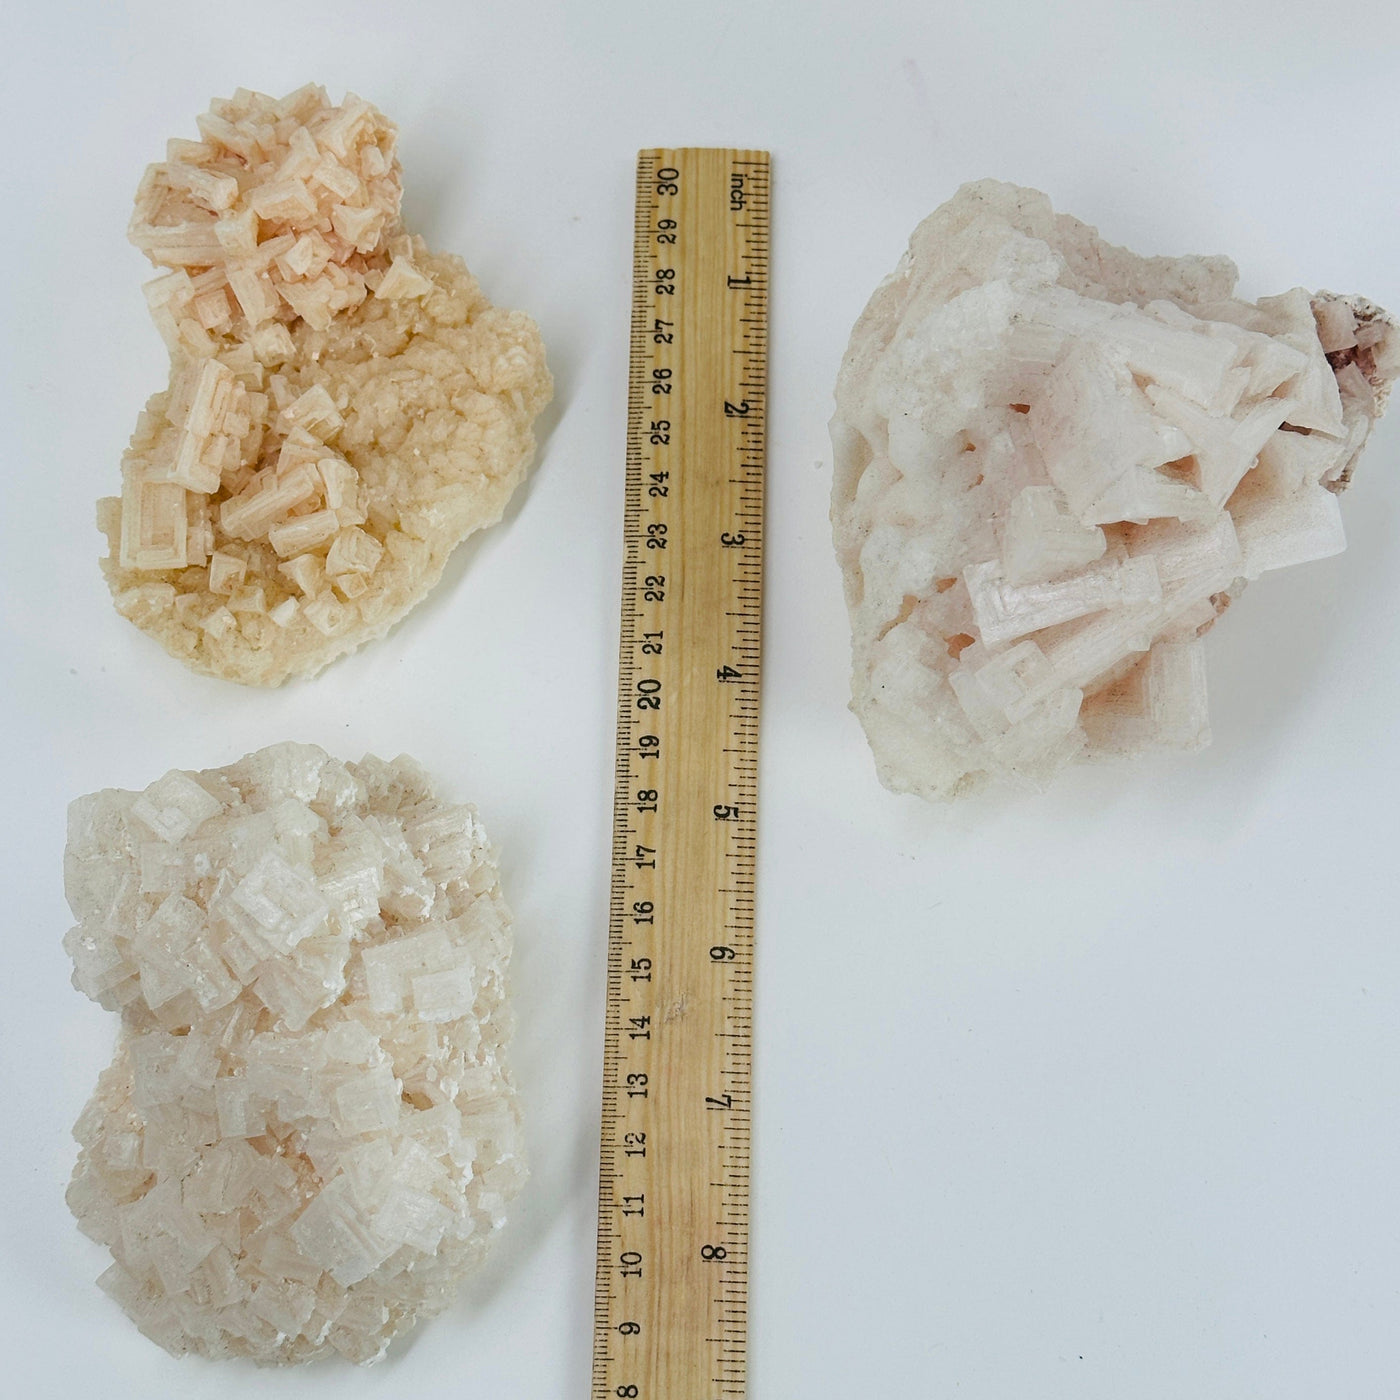 halite clusters next to a ruler for size reference